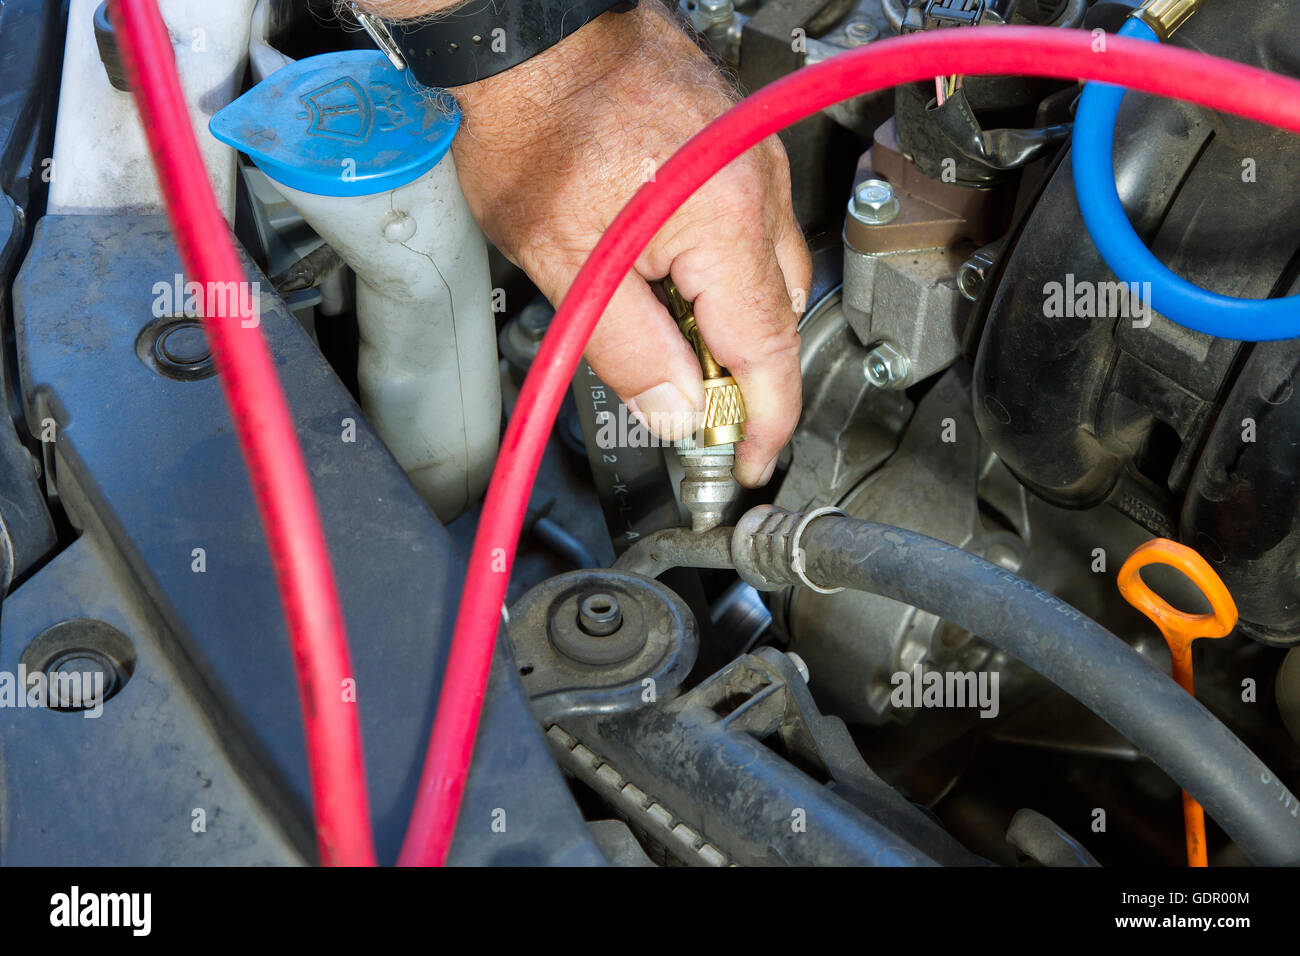 An automobile mechanic doing routine maintenance on an automobile air conditioning system. Stock Photo